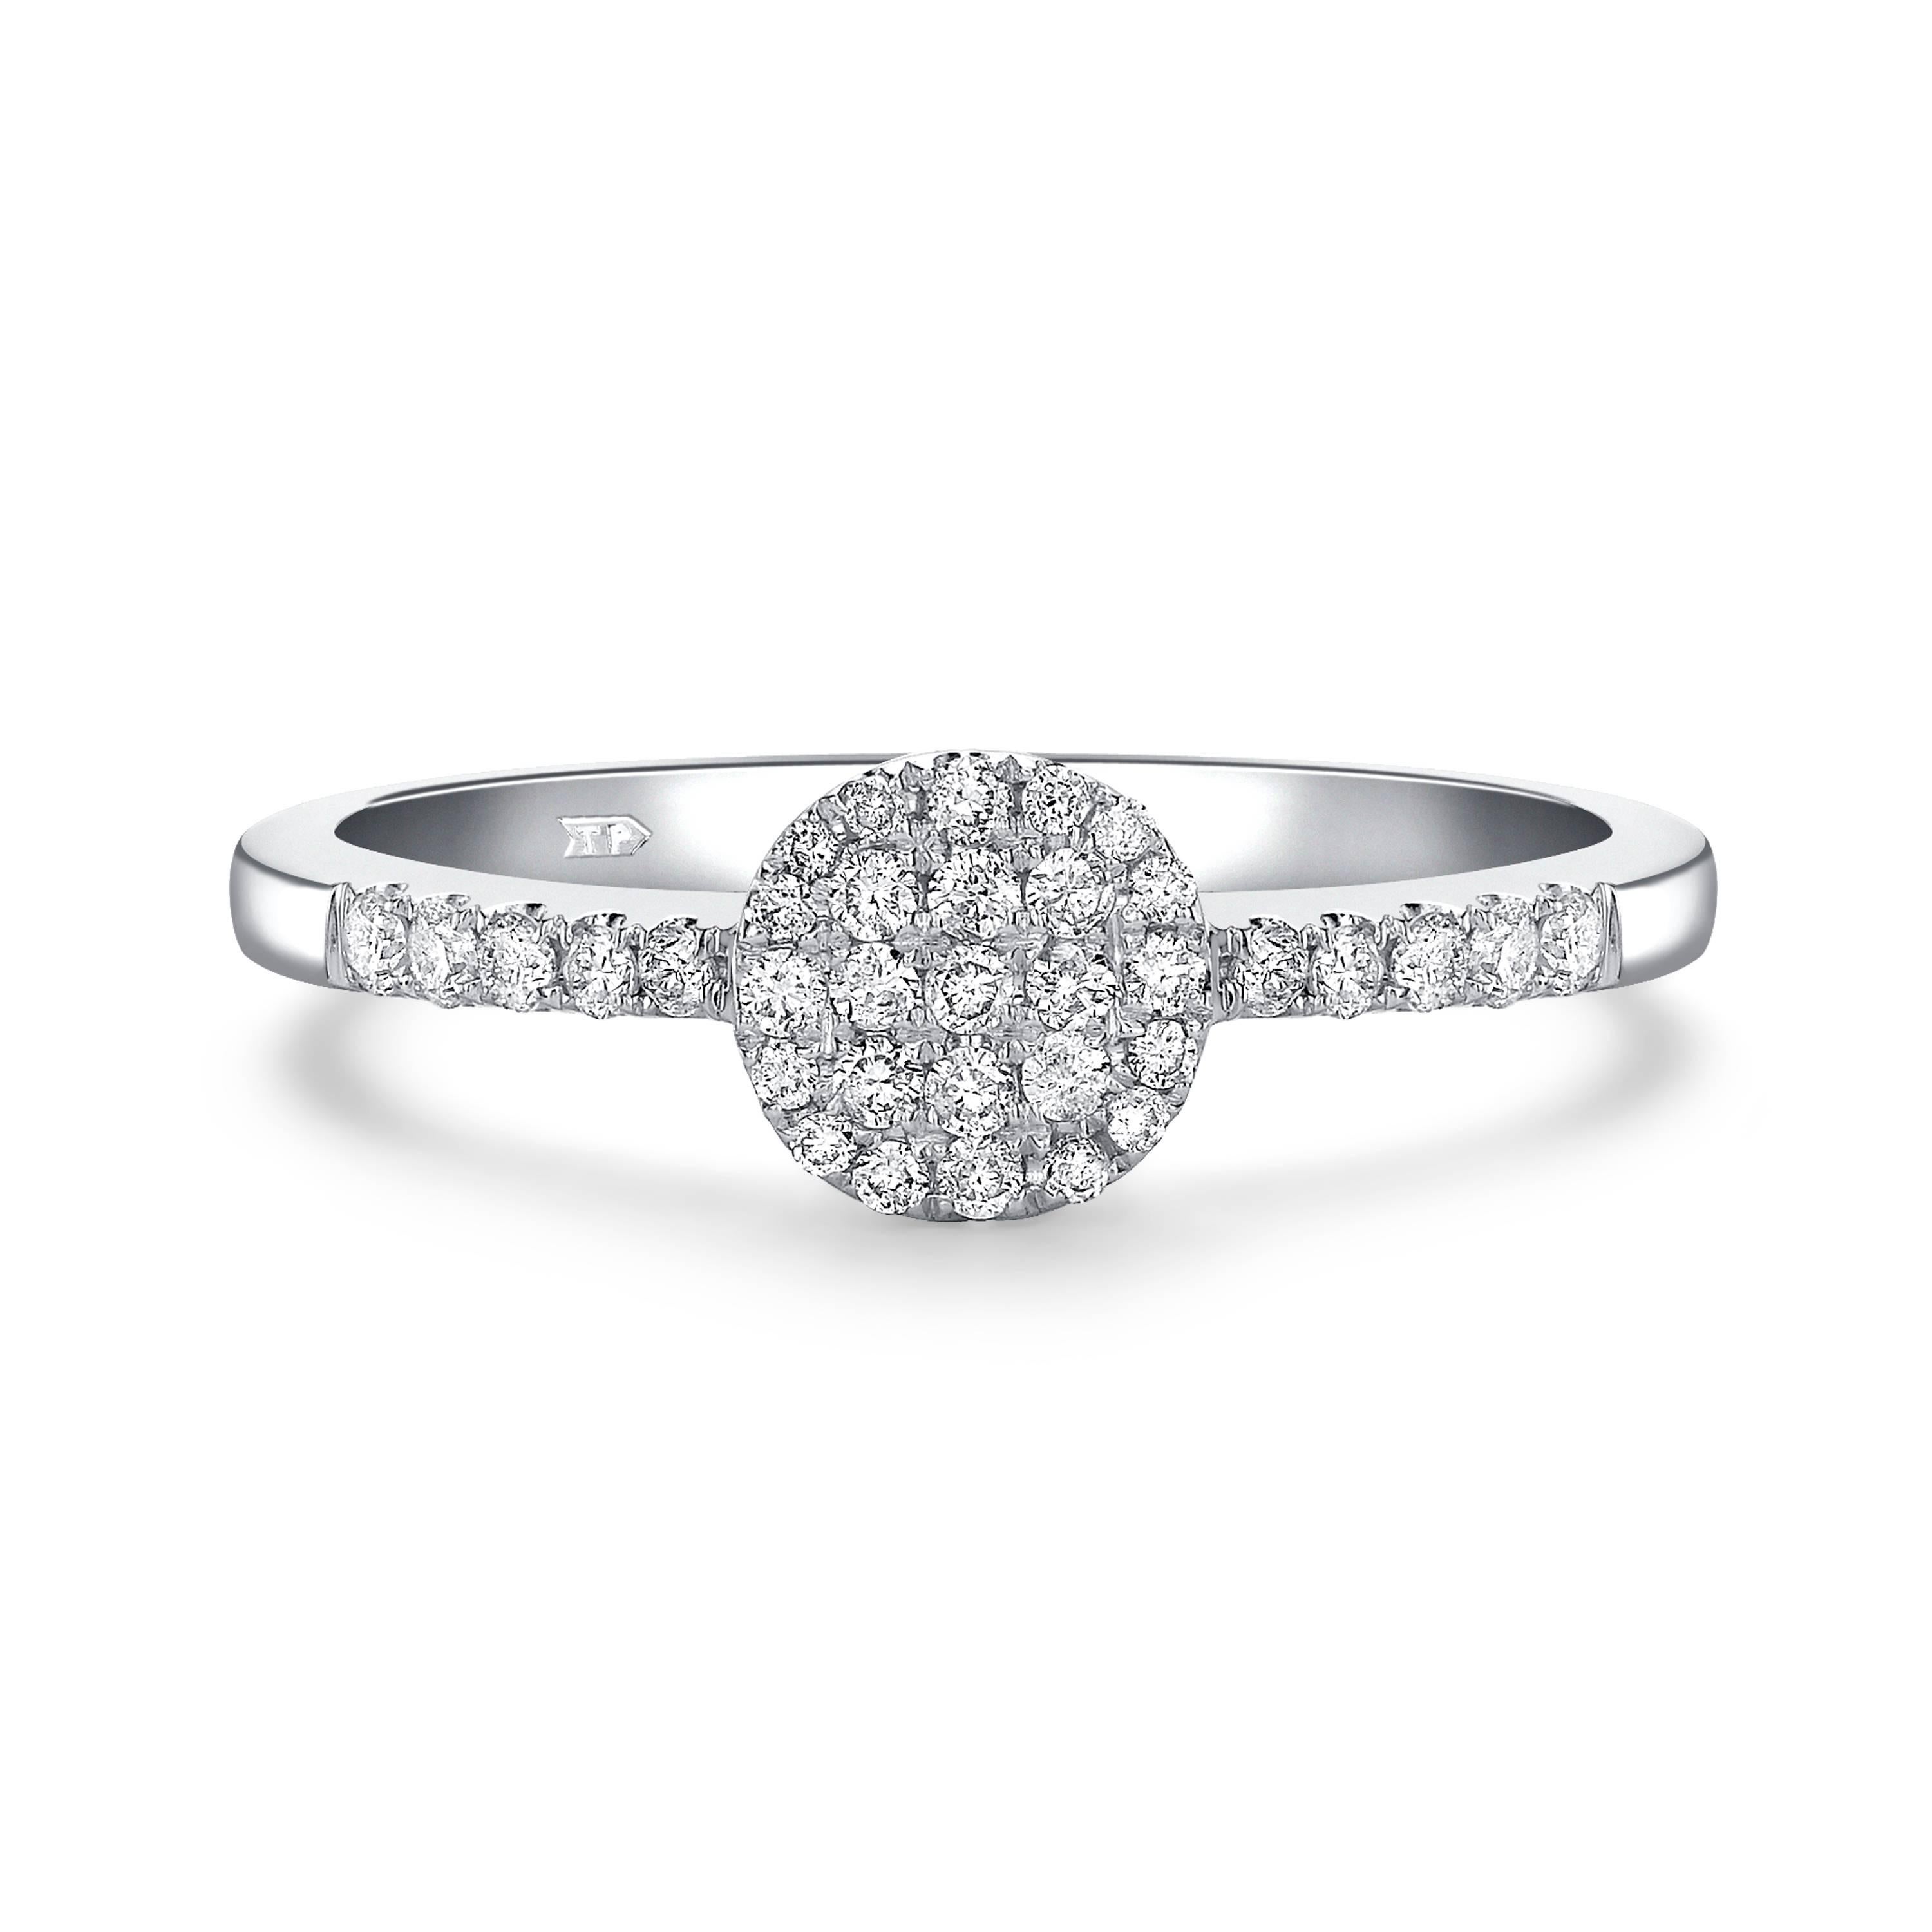 This delicate 0.33 Carat Round White Cut Diamond cluster engagement ring is set in 18 Karat White Gold, color H clarity SI1. Ring size UK - N, US - 7 1/2. Available in other carat sizes as well as ring sizes. British hallmarked by the London Assay